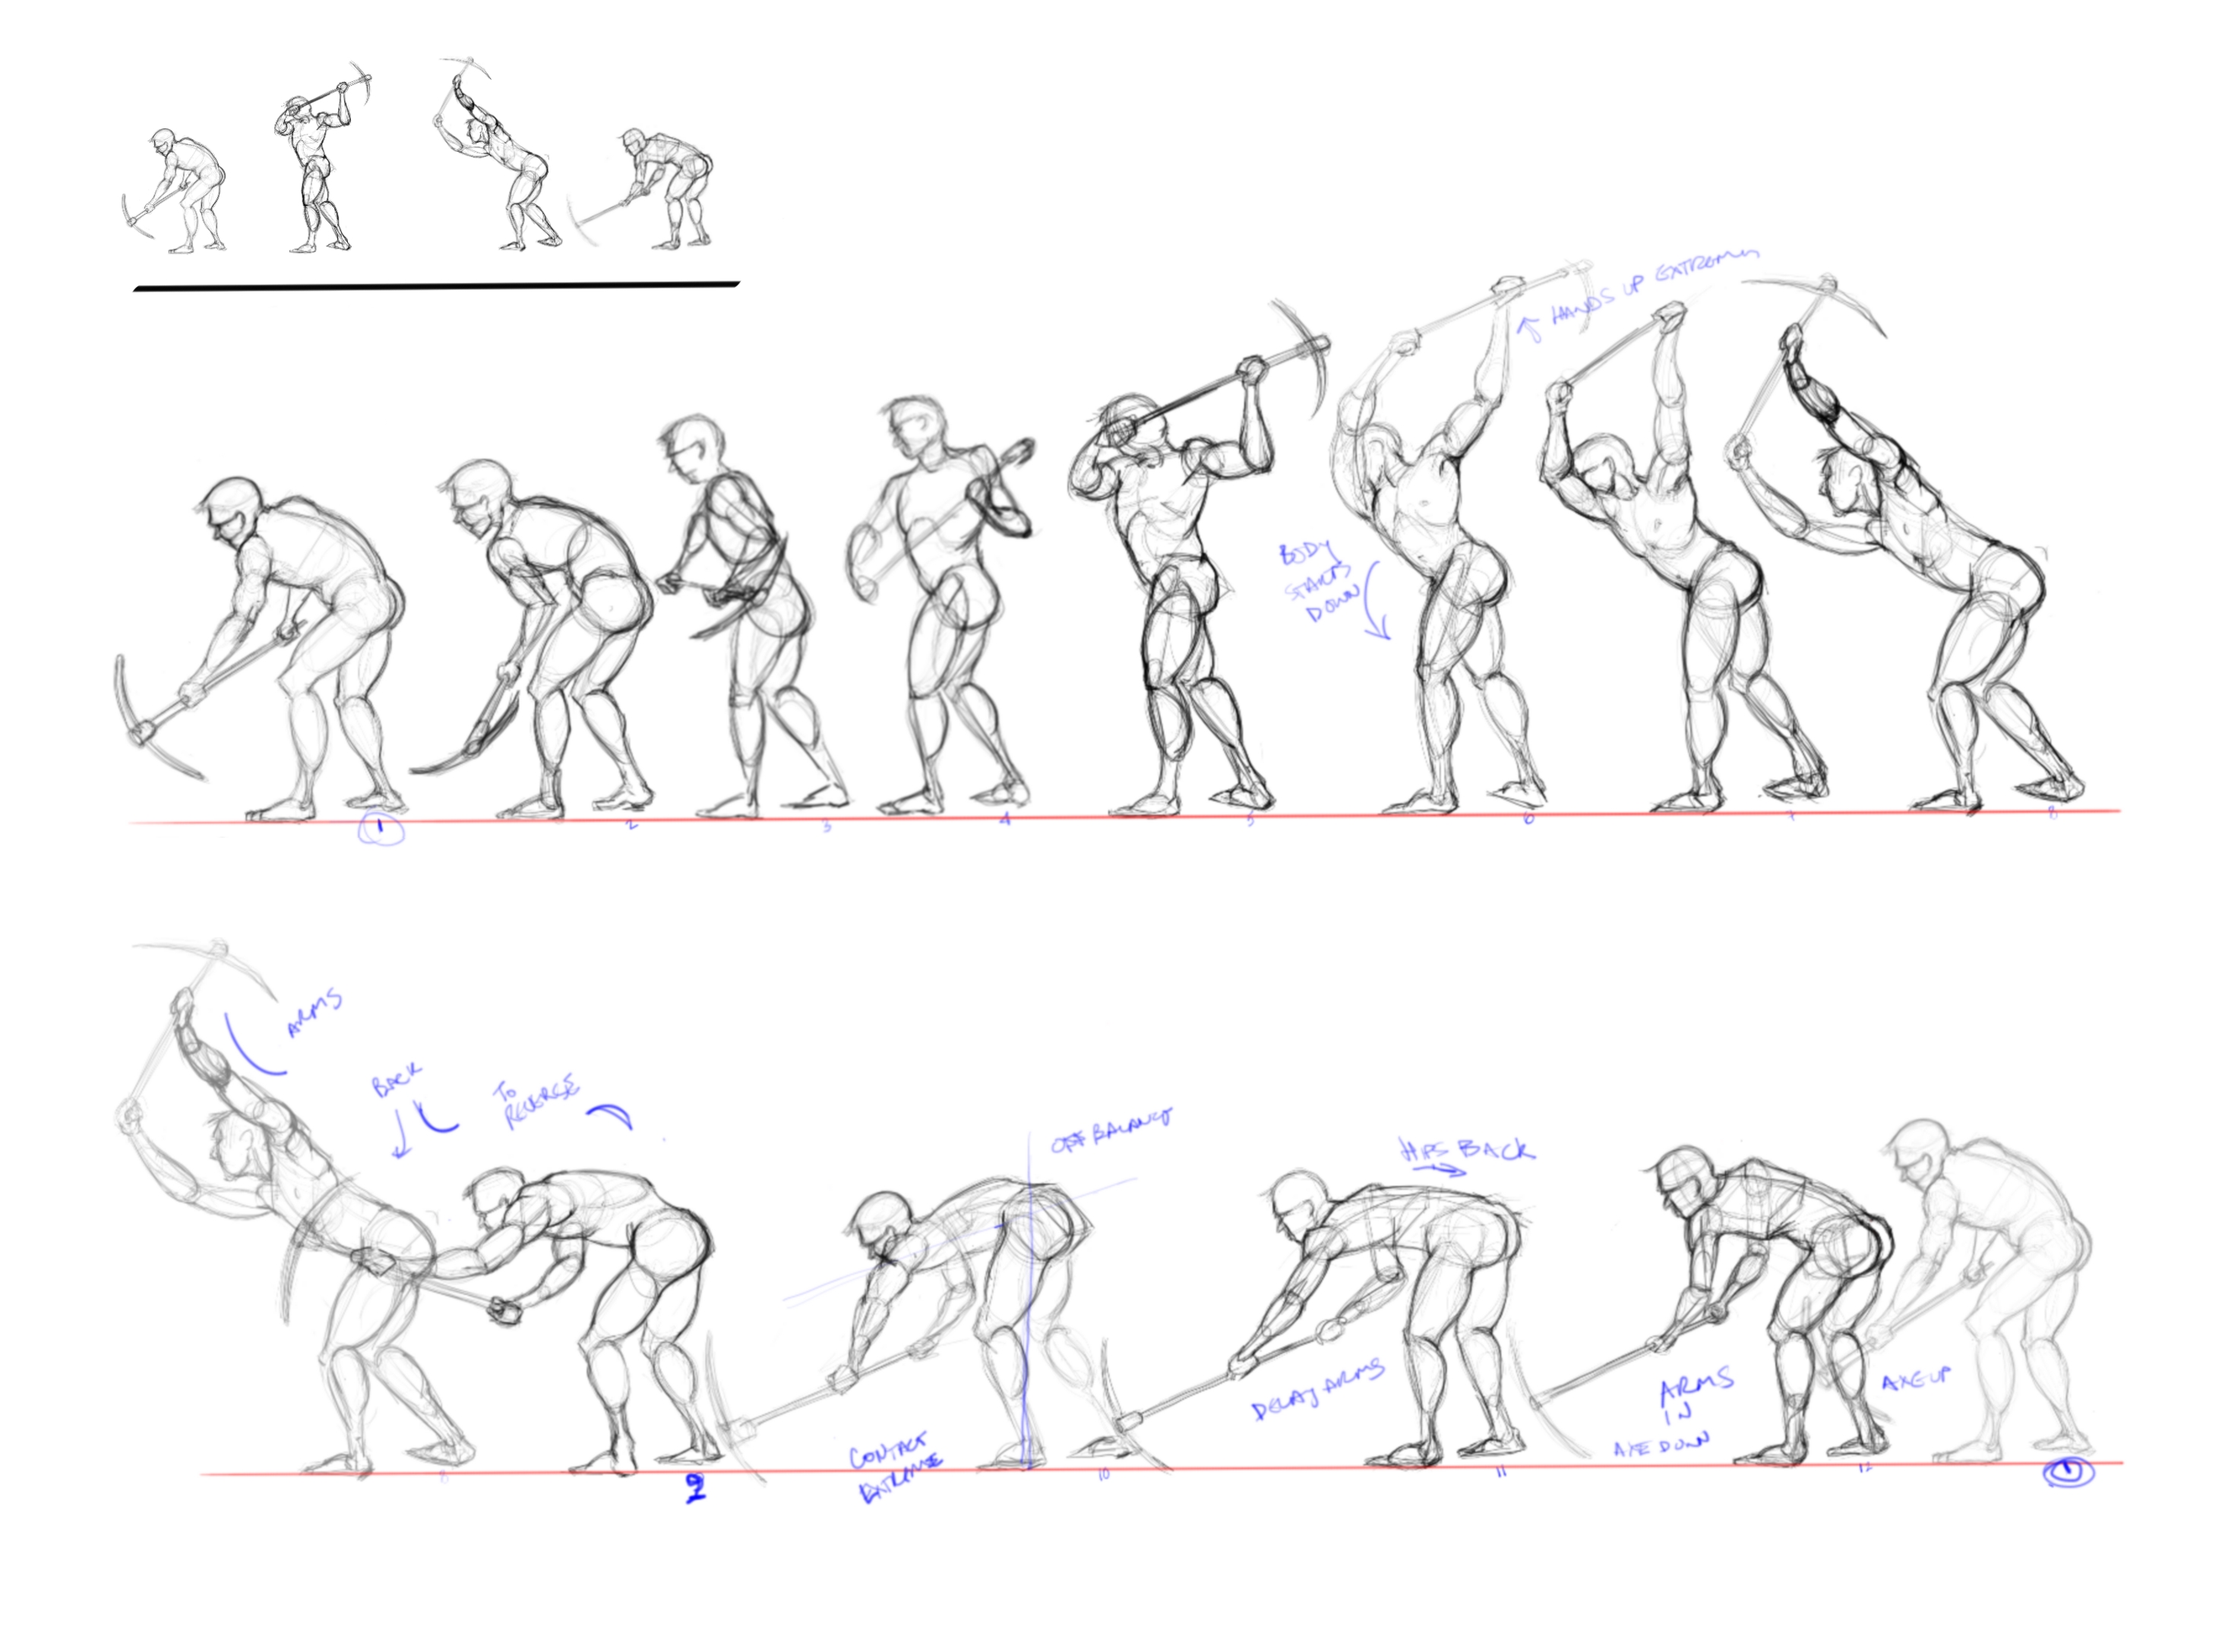 Weight study of model using a pickaxe. Sequential drawings.